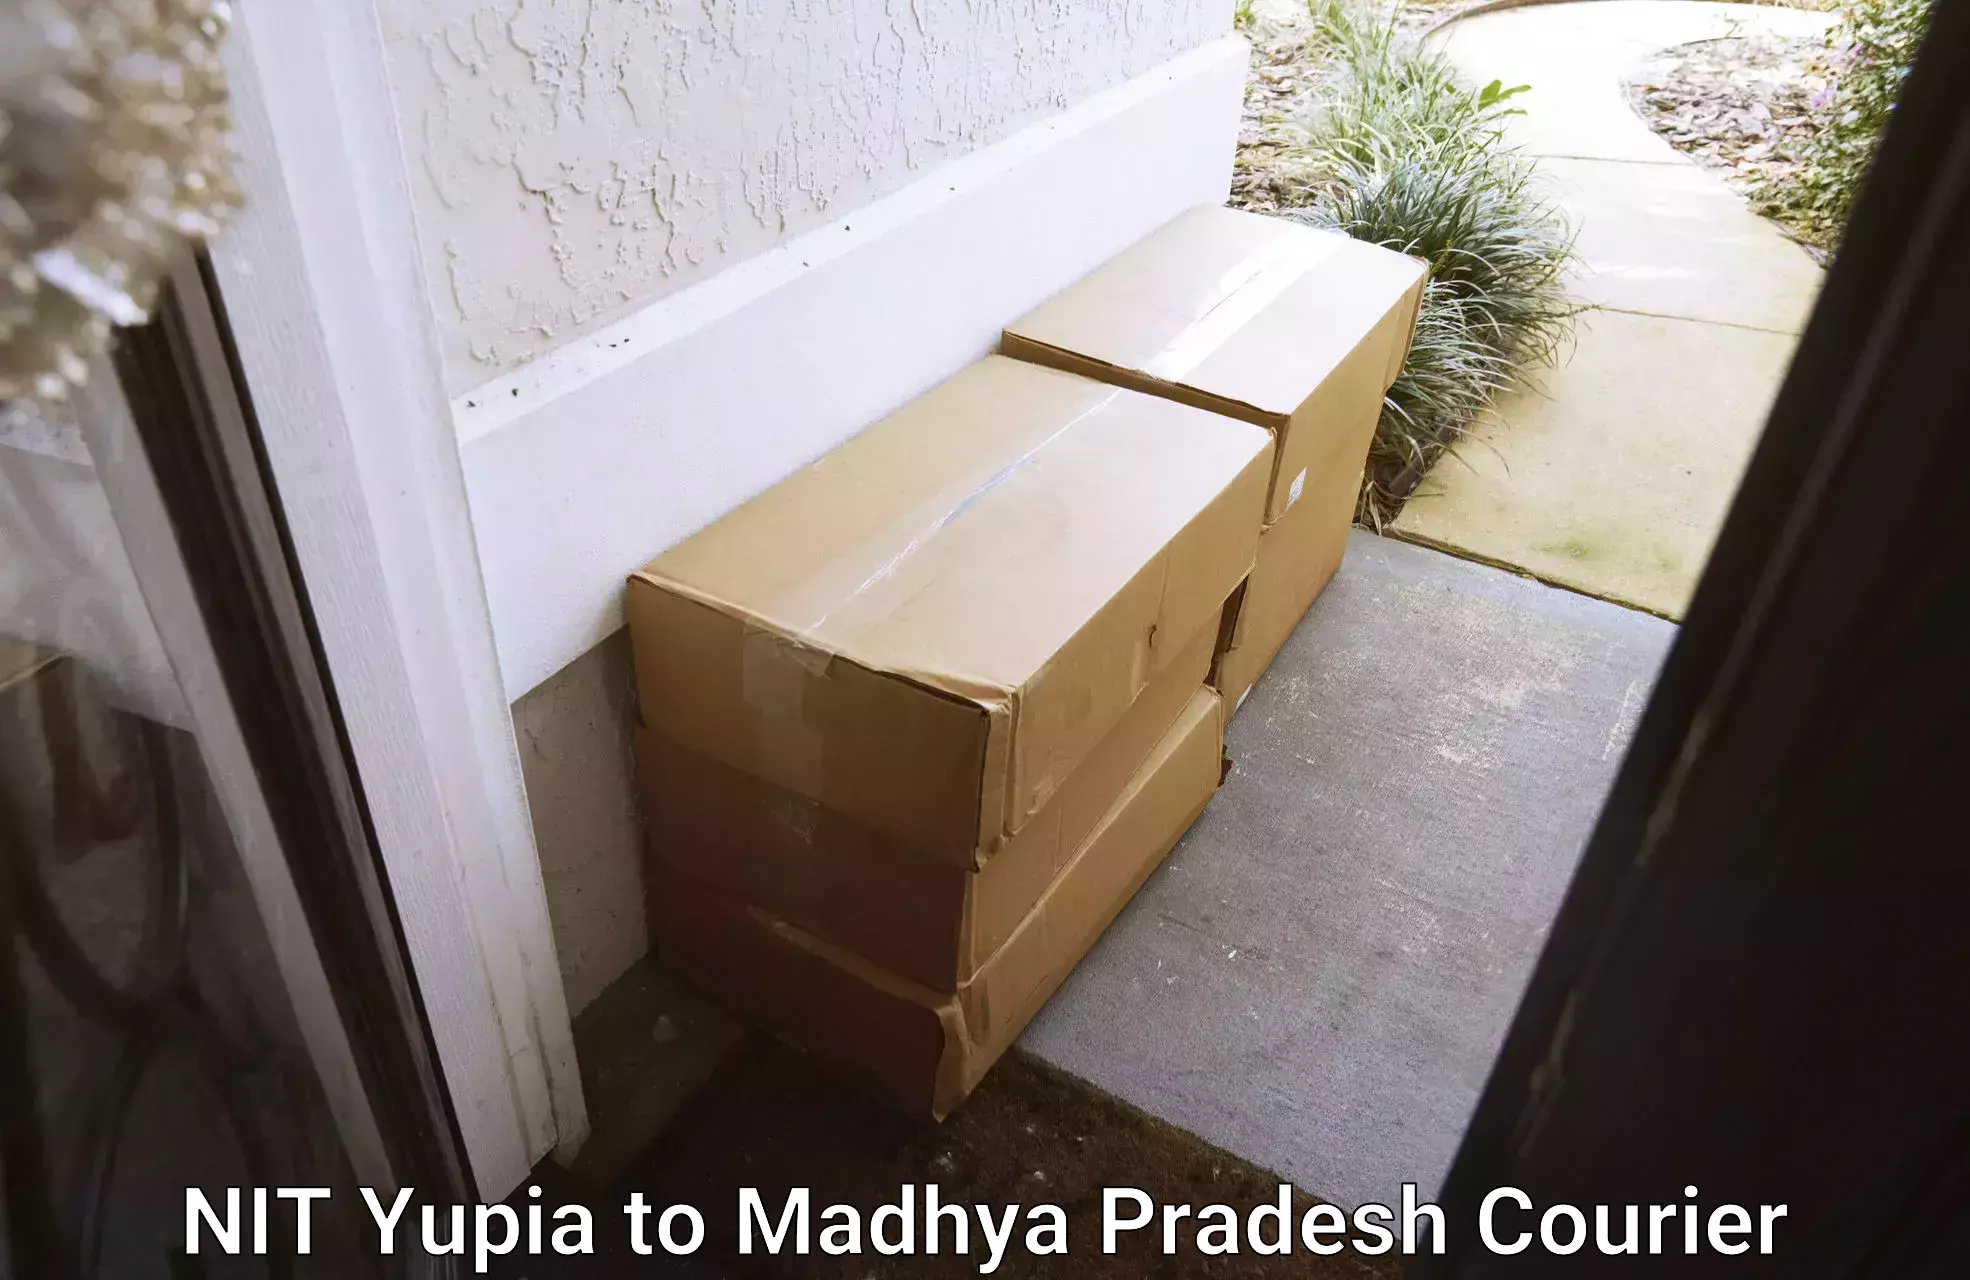 Cost-effective courier options NIT Yupia to Indore